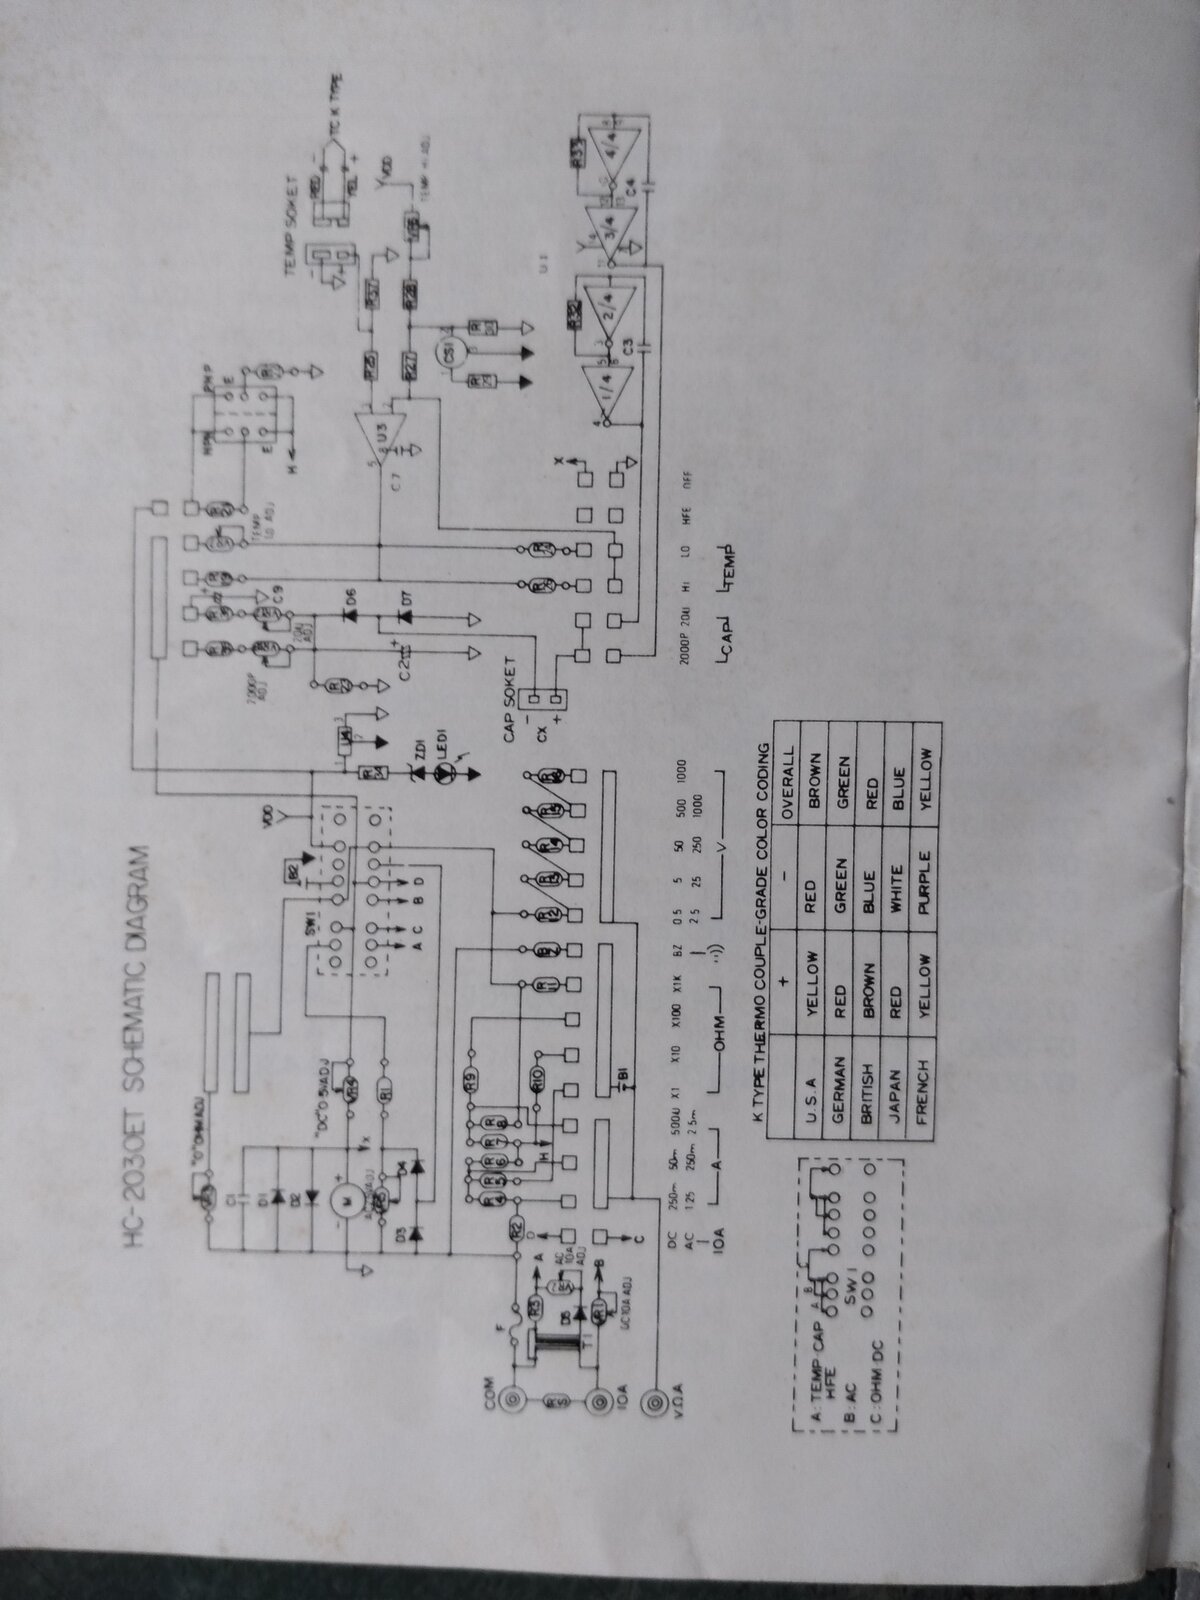 Hung Chang HC-2030ET Schematics and circuit diagram along with component listings regarding the repair and service and repair of the Hang Chang VOM multi meter.